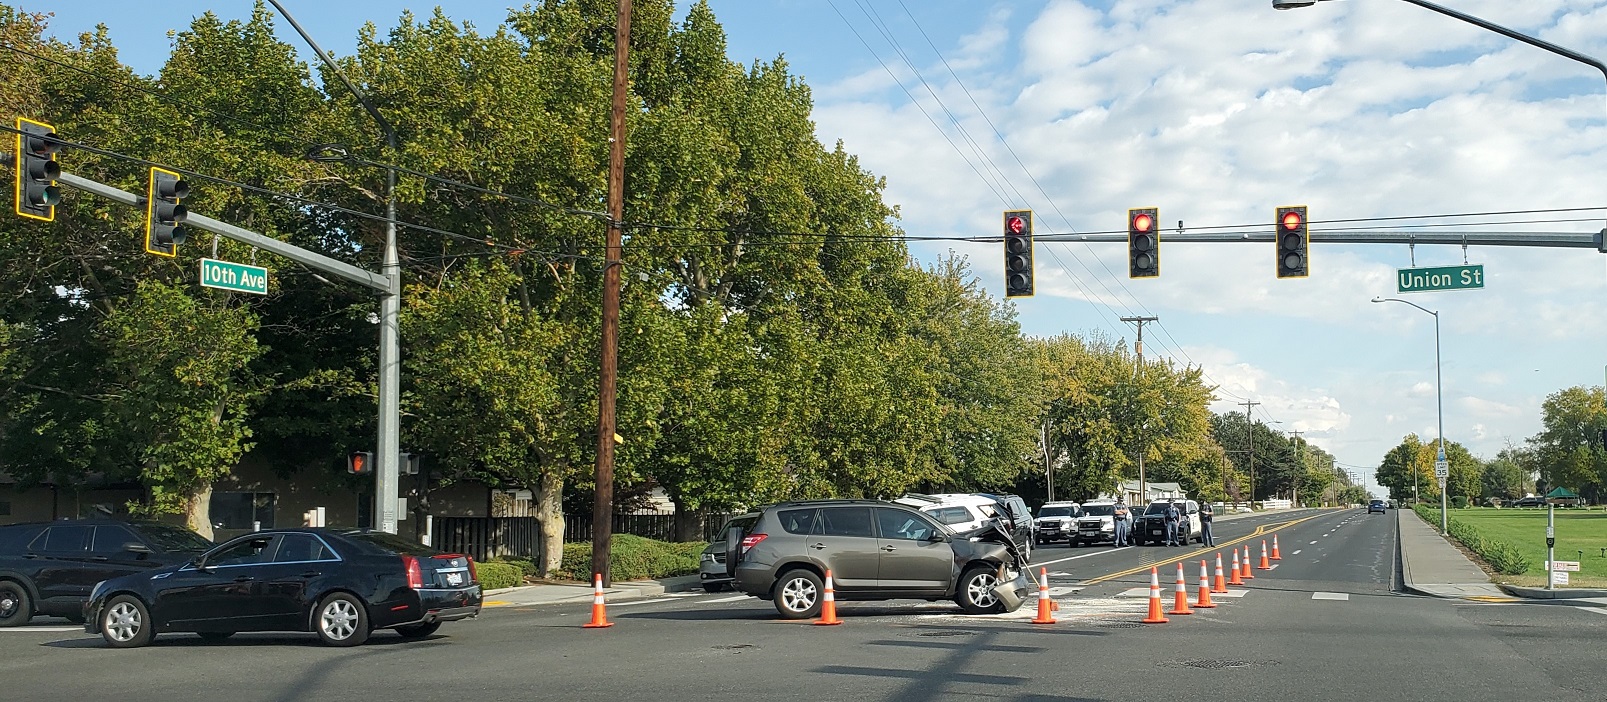 Crash at the intersection of 10th and Union in Kennewick